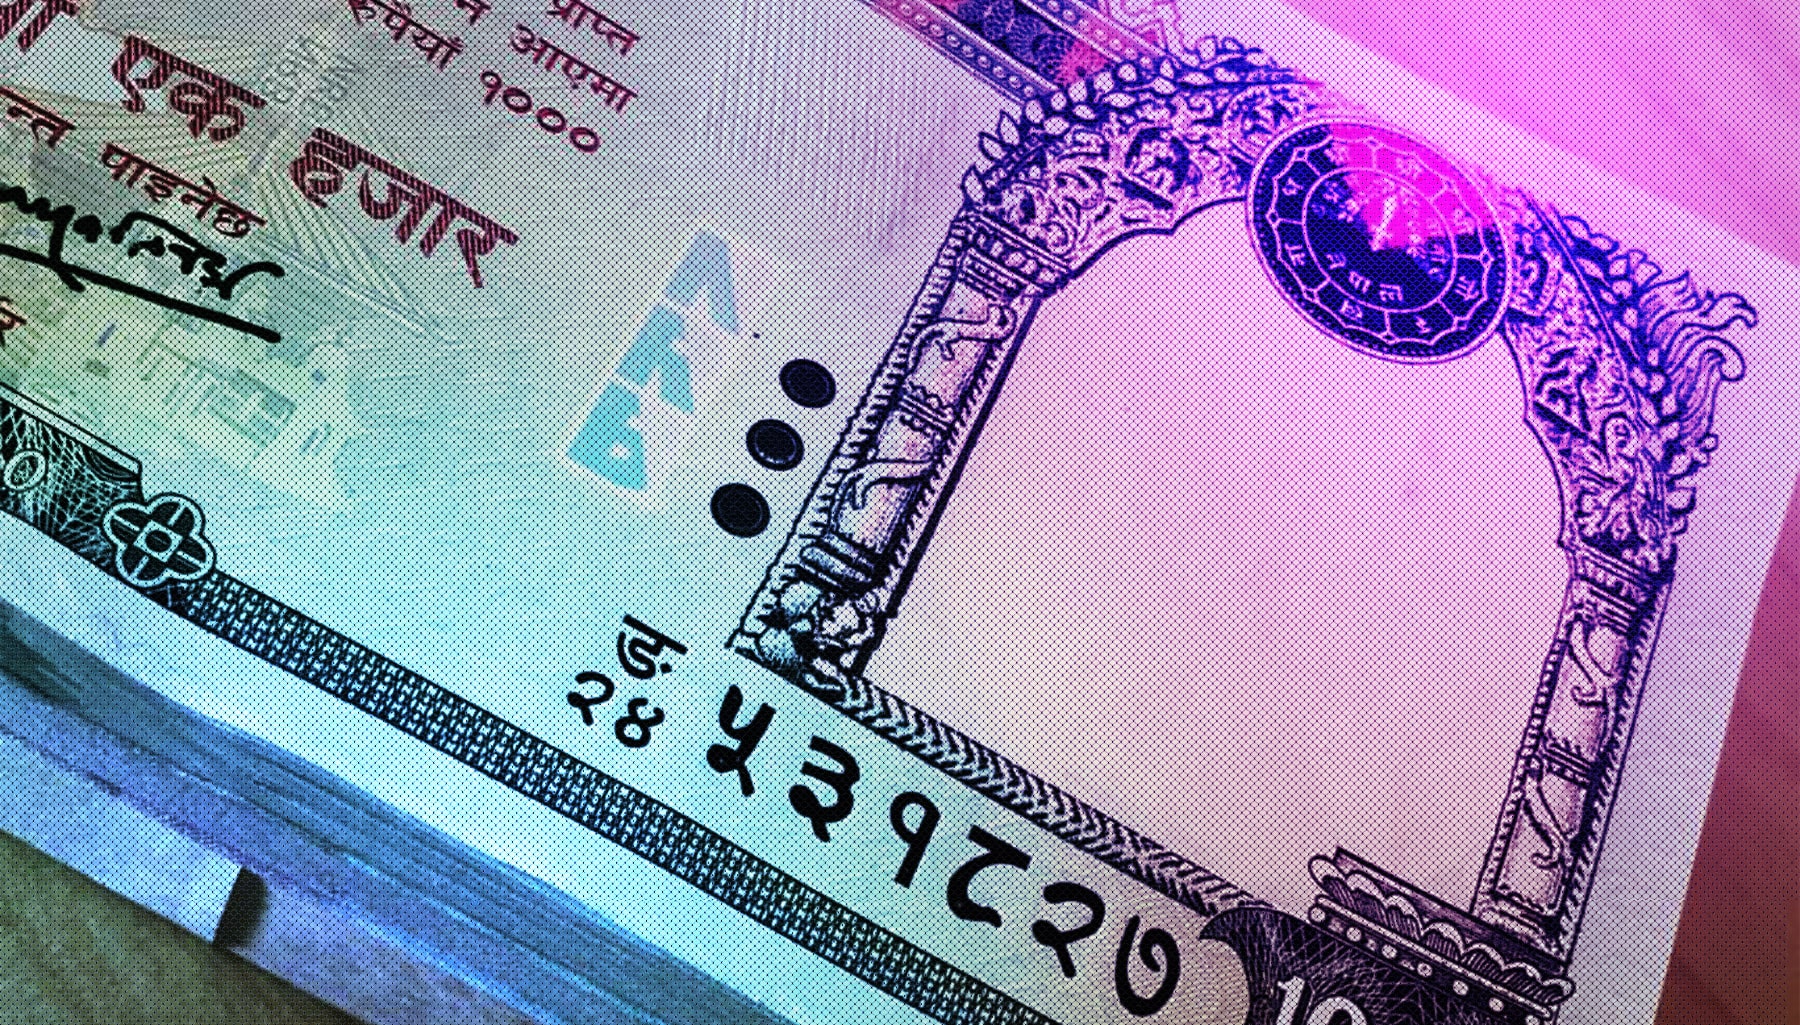 A stylized graphic of the 1000 rupee Nepali bank note